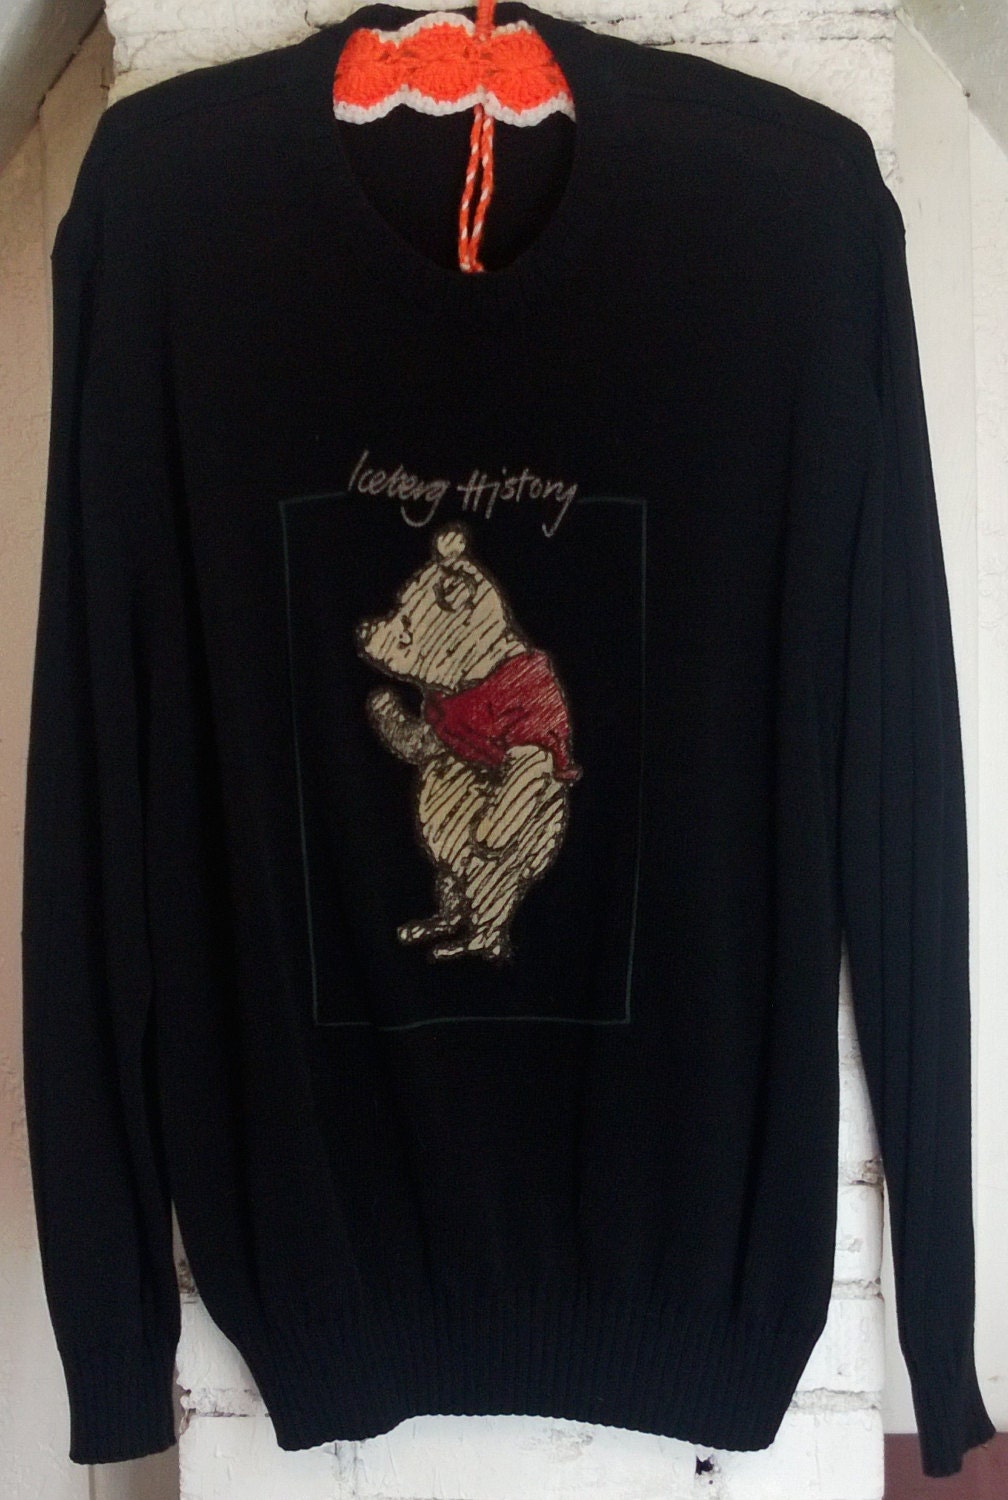 Vintage 80s 90s Iceberg History Winnie The Pooh Sweater and Astounding Vintage Iceberg History Clothing you should See